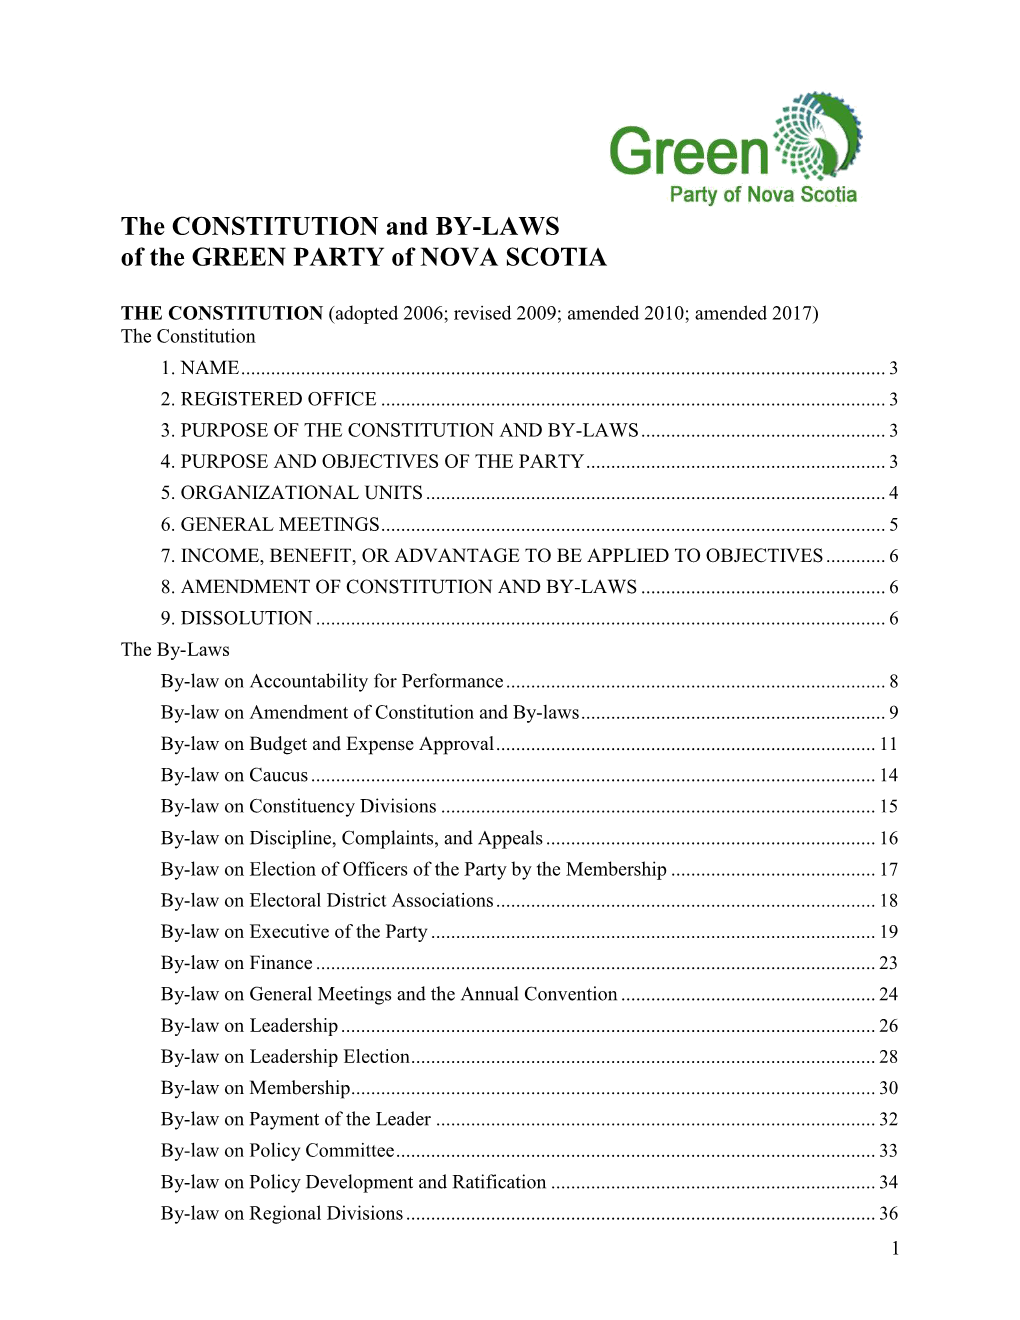 The CONSTITUTION and BY-LAWS of the GREEN PARTY of NOVA SCOTIA